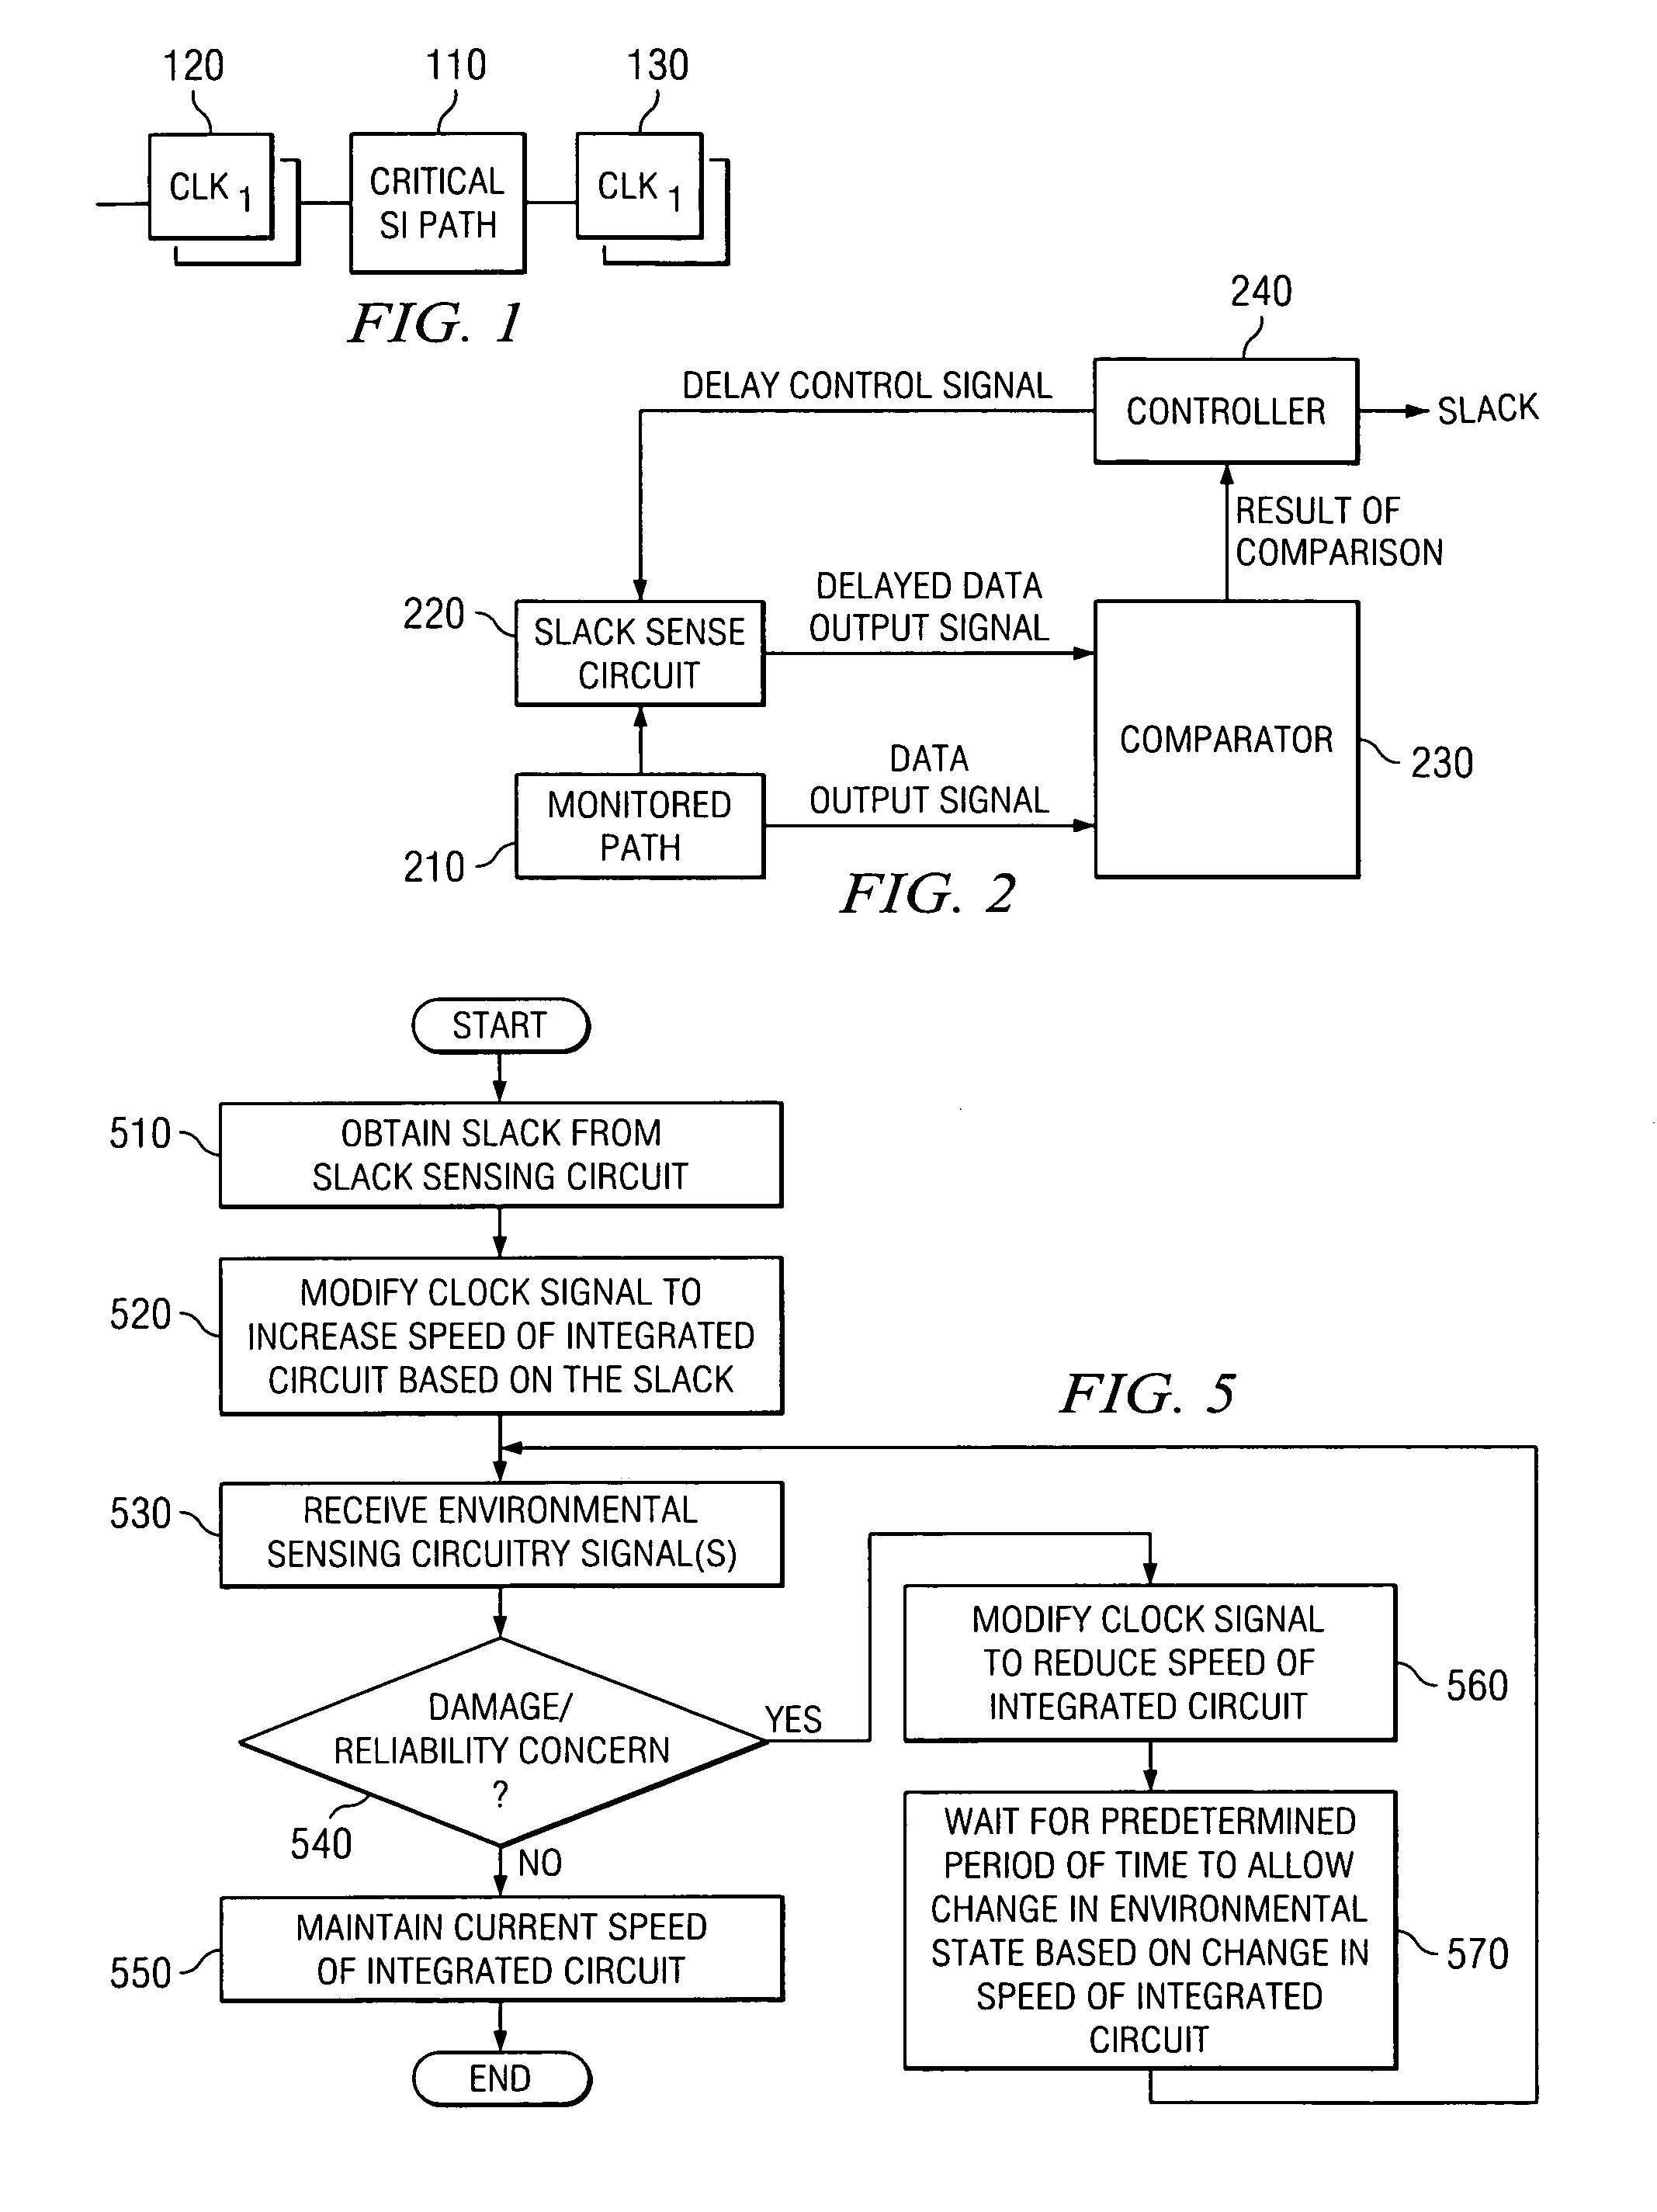 Apparatus and method for accurately tuning the speed of an integrated circuit